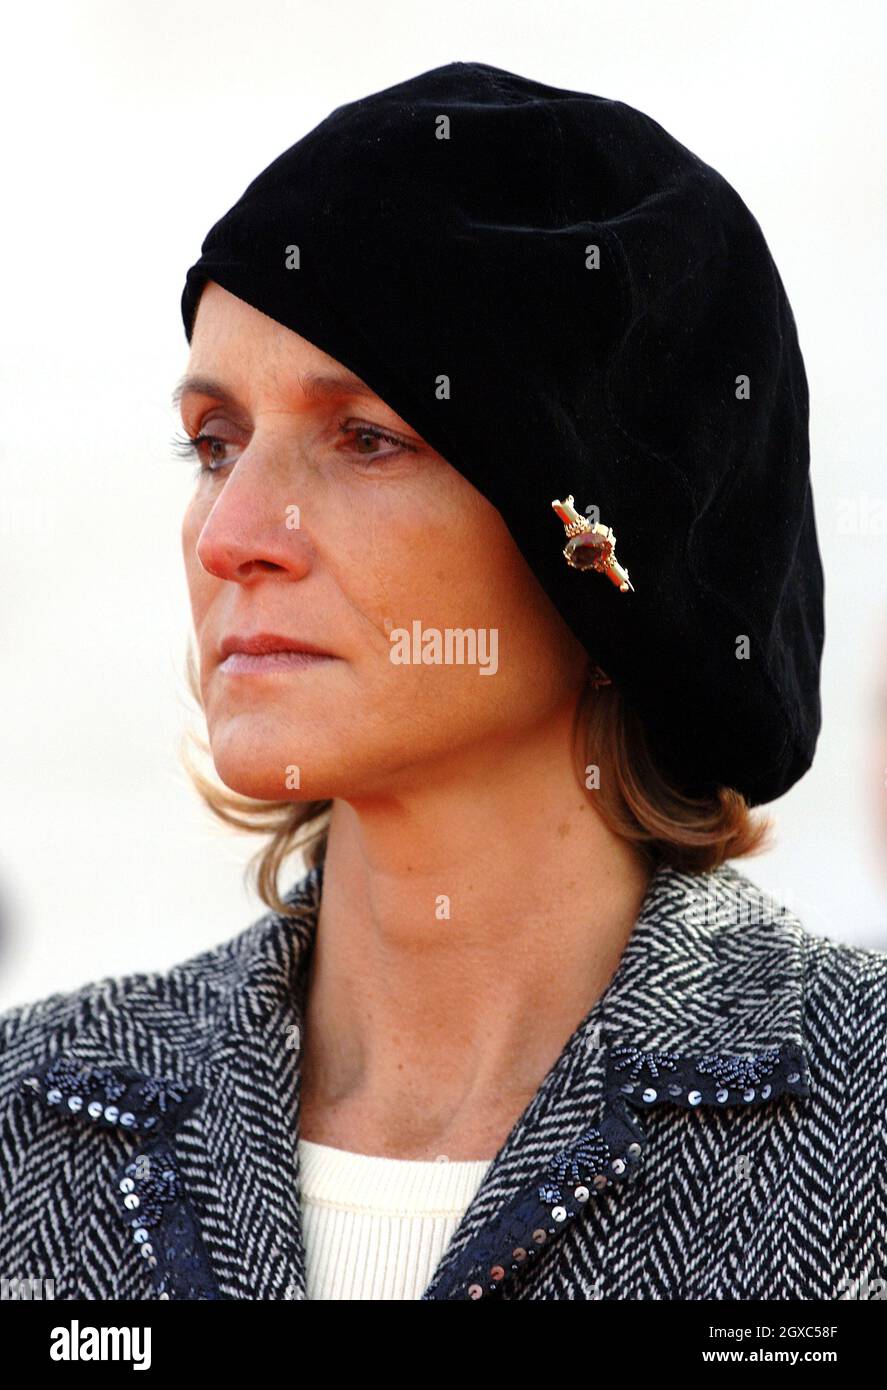 Marie-Laure de Villepin, wife of French Prime Minister Dominique de  Villepin, has tears in her eyes as she attends a ceremony to mark the 90th  anniversary of the Battle of Vimy Ridge